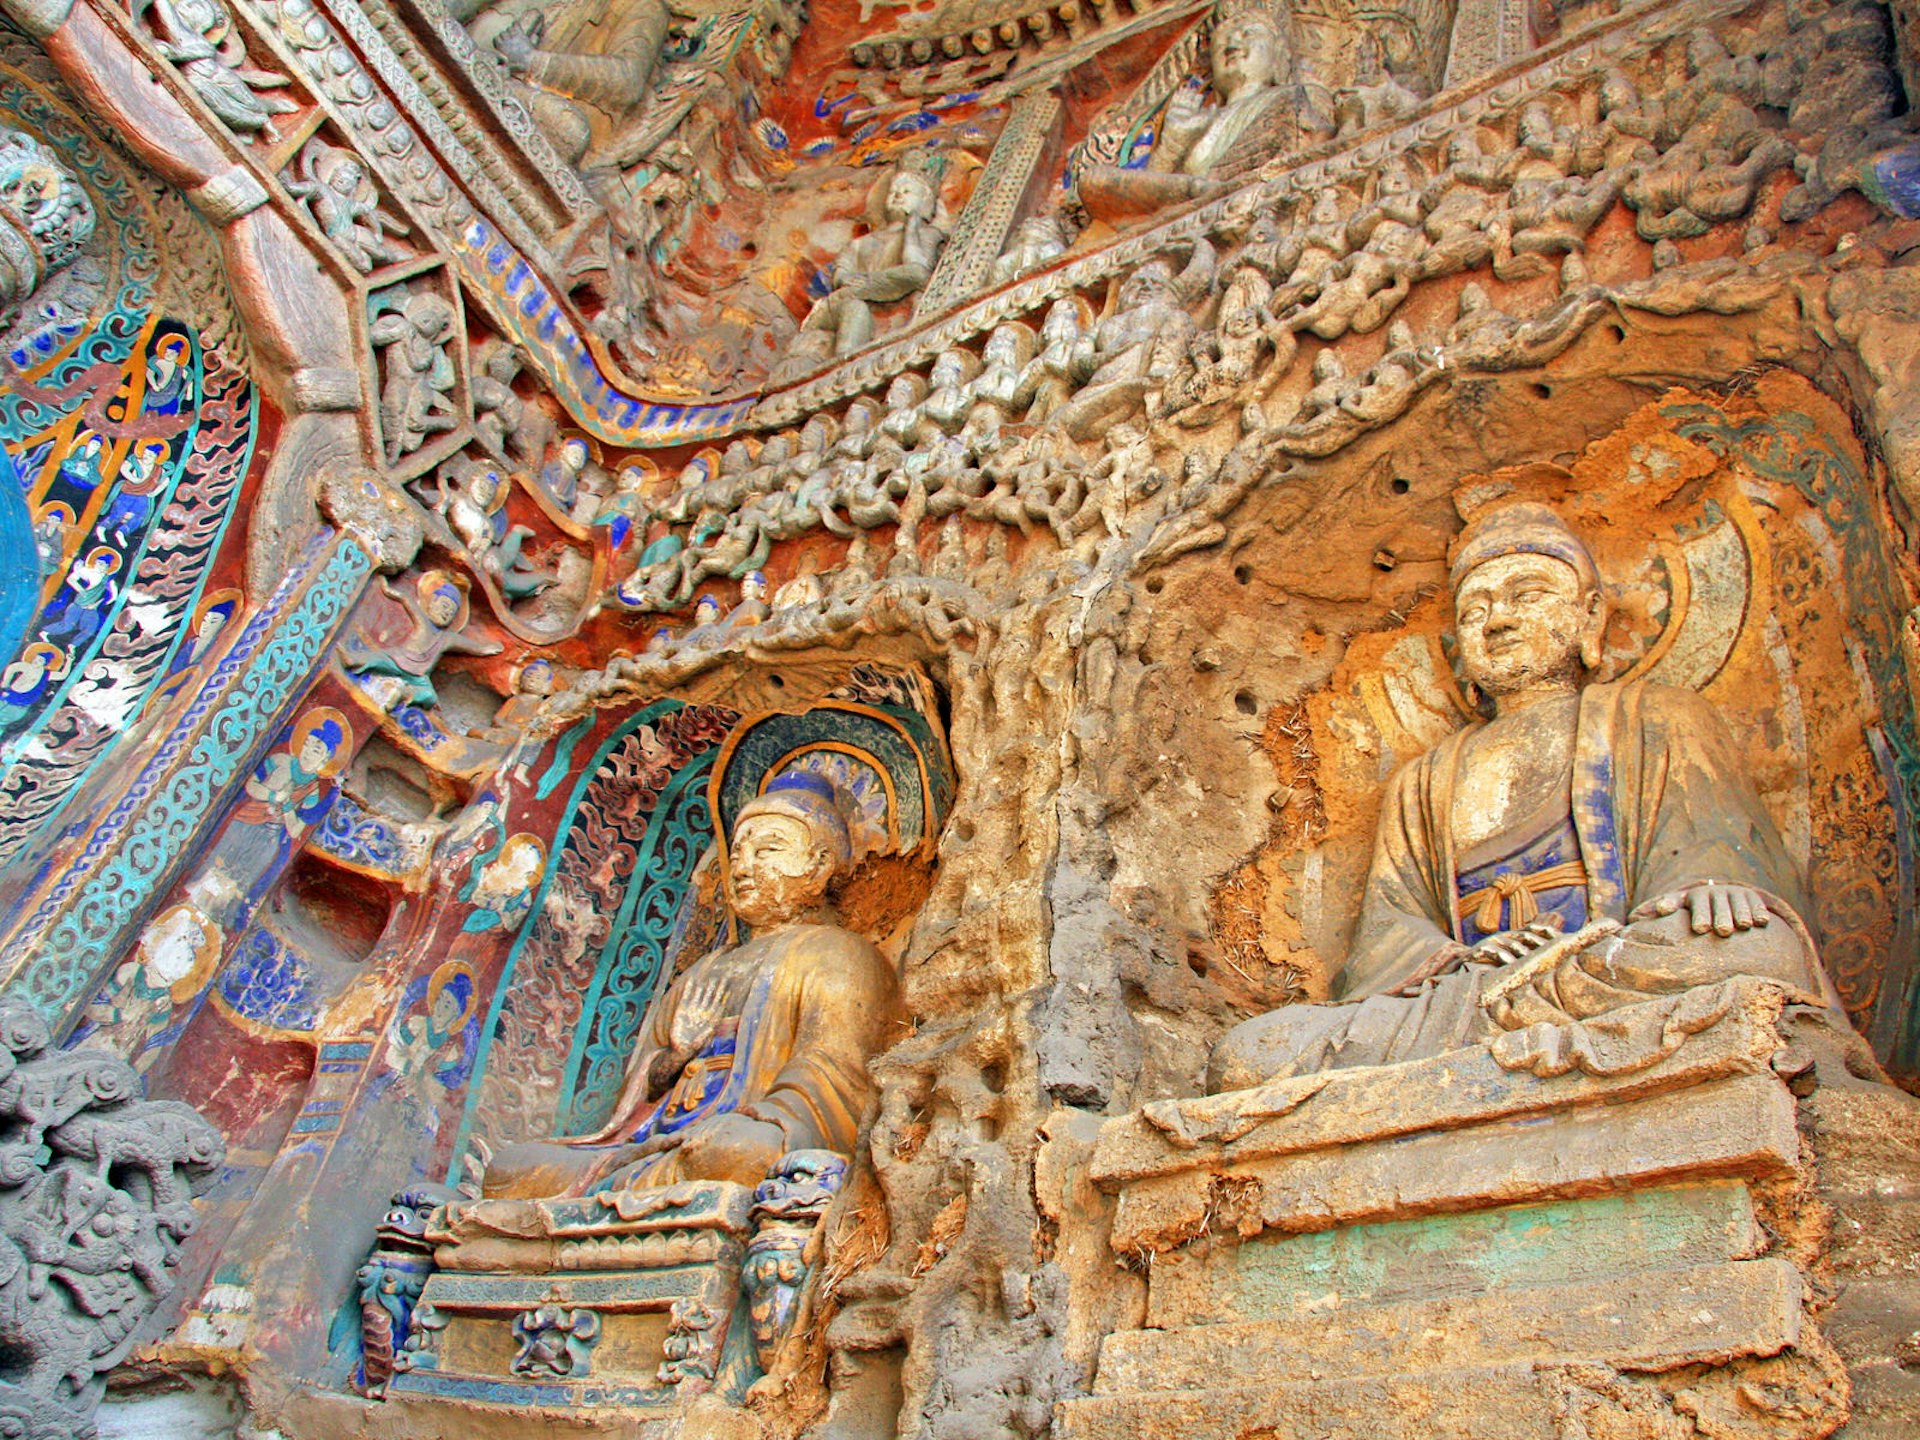 Colourful Buddhas and animal motifs adorn the grottoes at Yungang © Mark Brandon / Shutterstock